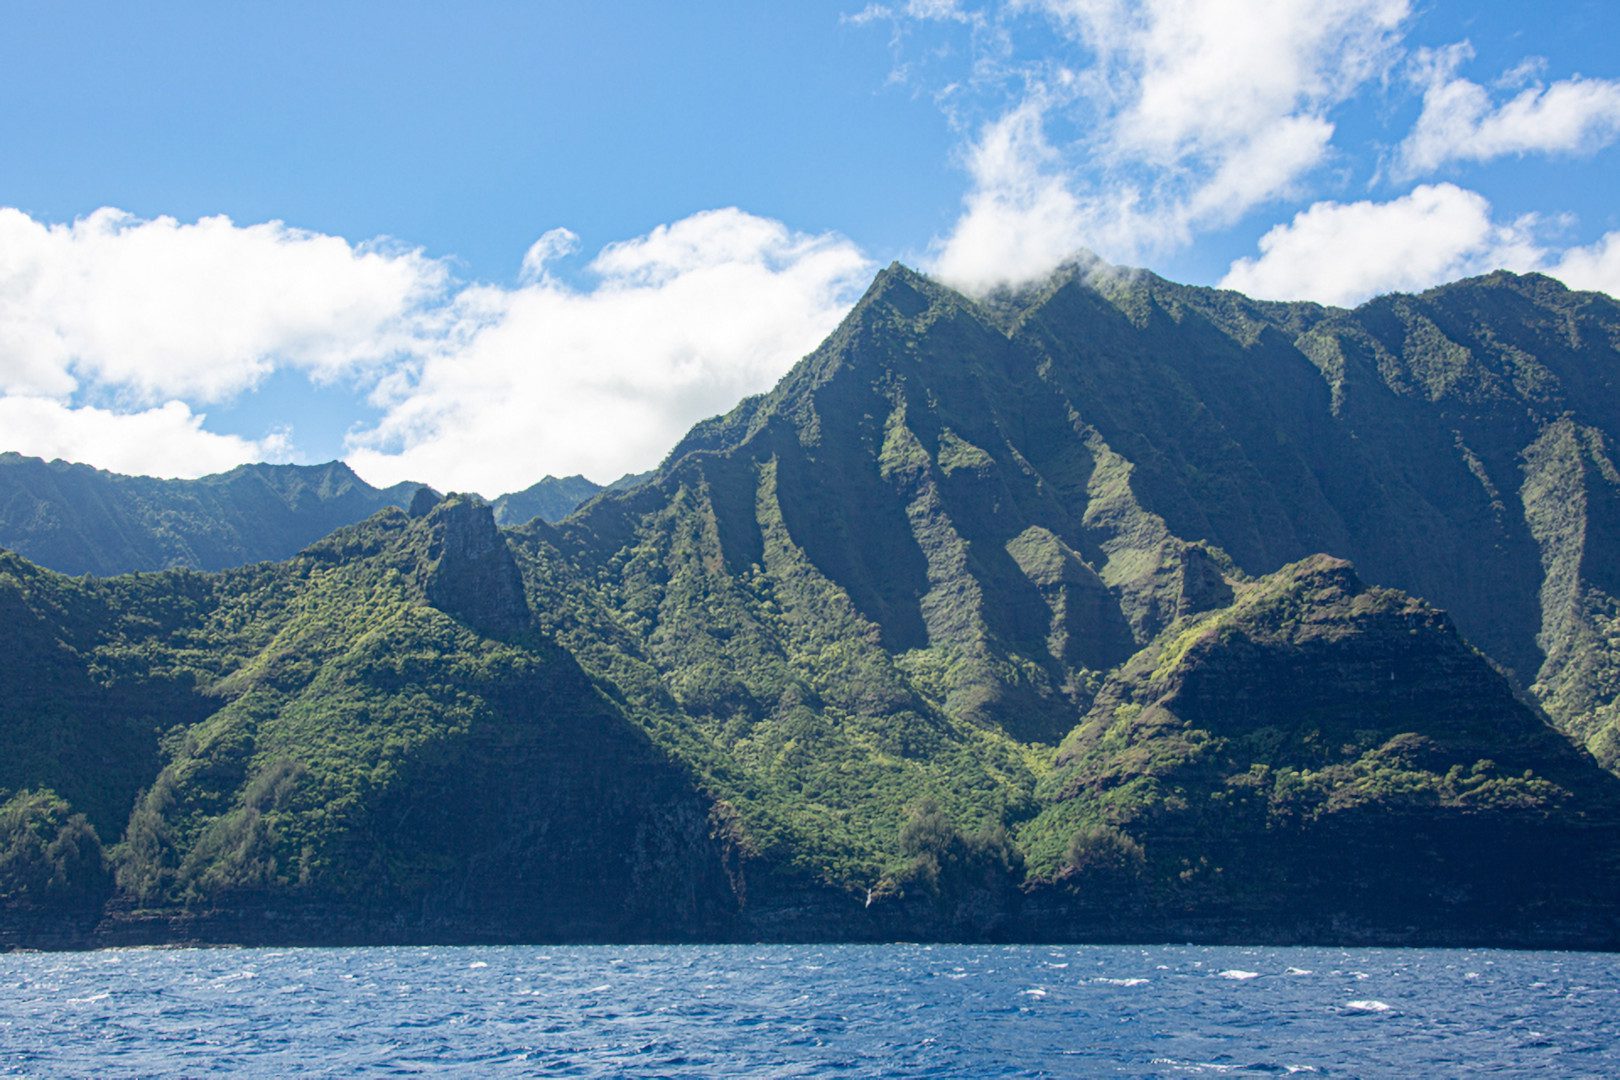 The Small and Large Mountains Near The Seashore